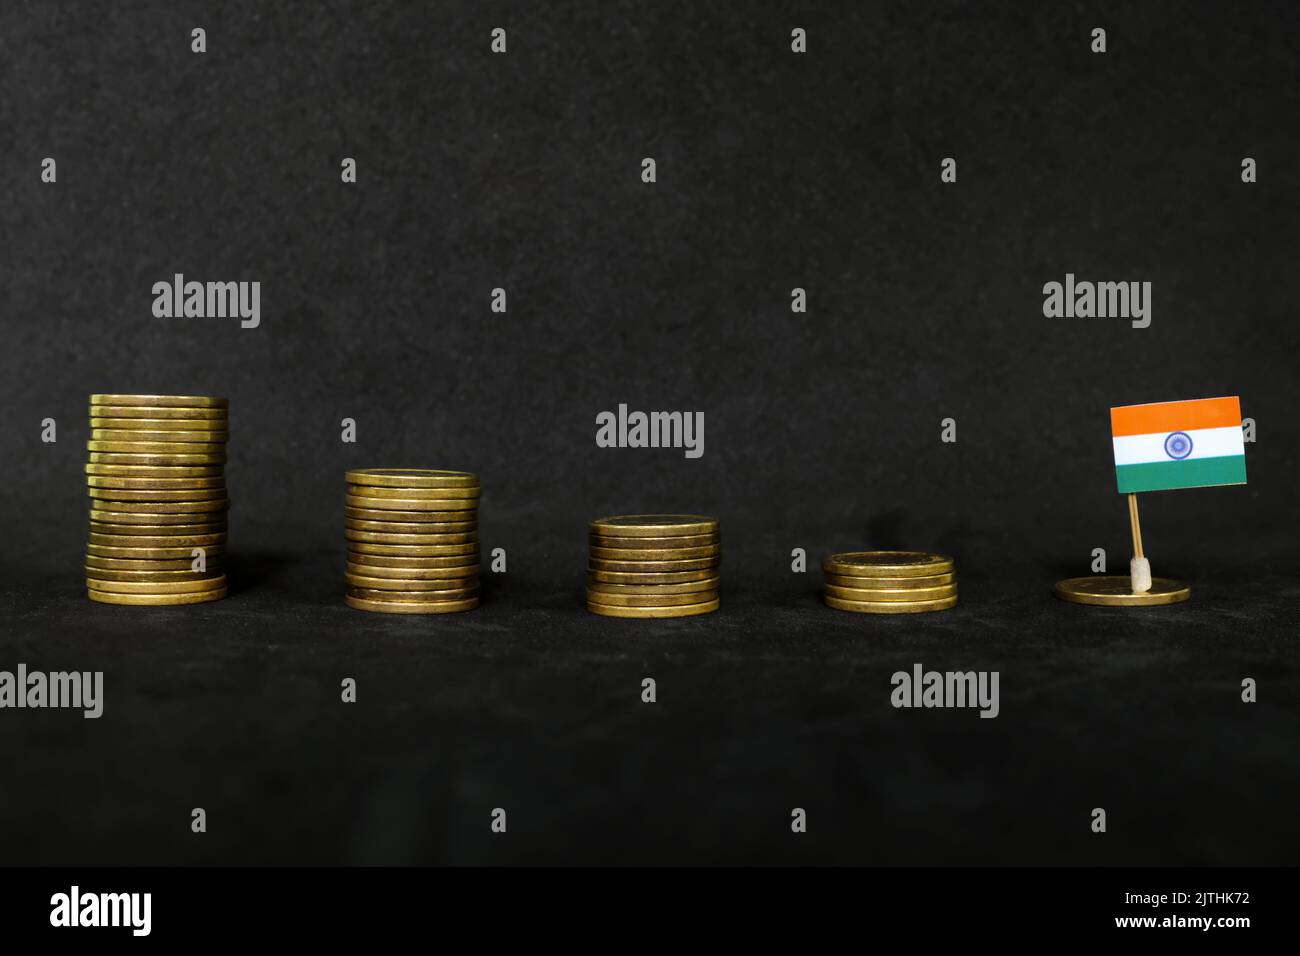 India economic recession, financial crisis and peso depreciation concept. Indian flag in decreasing stack of coins in dark black background. Stock Photo